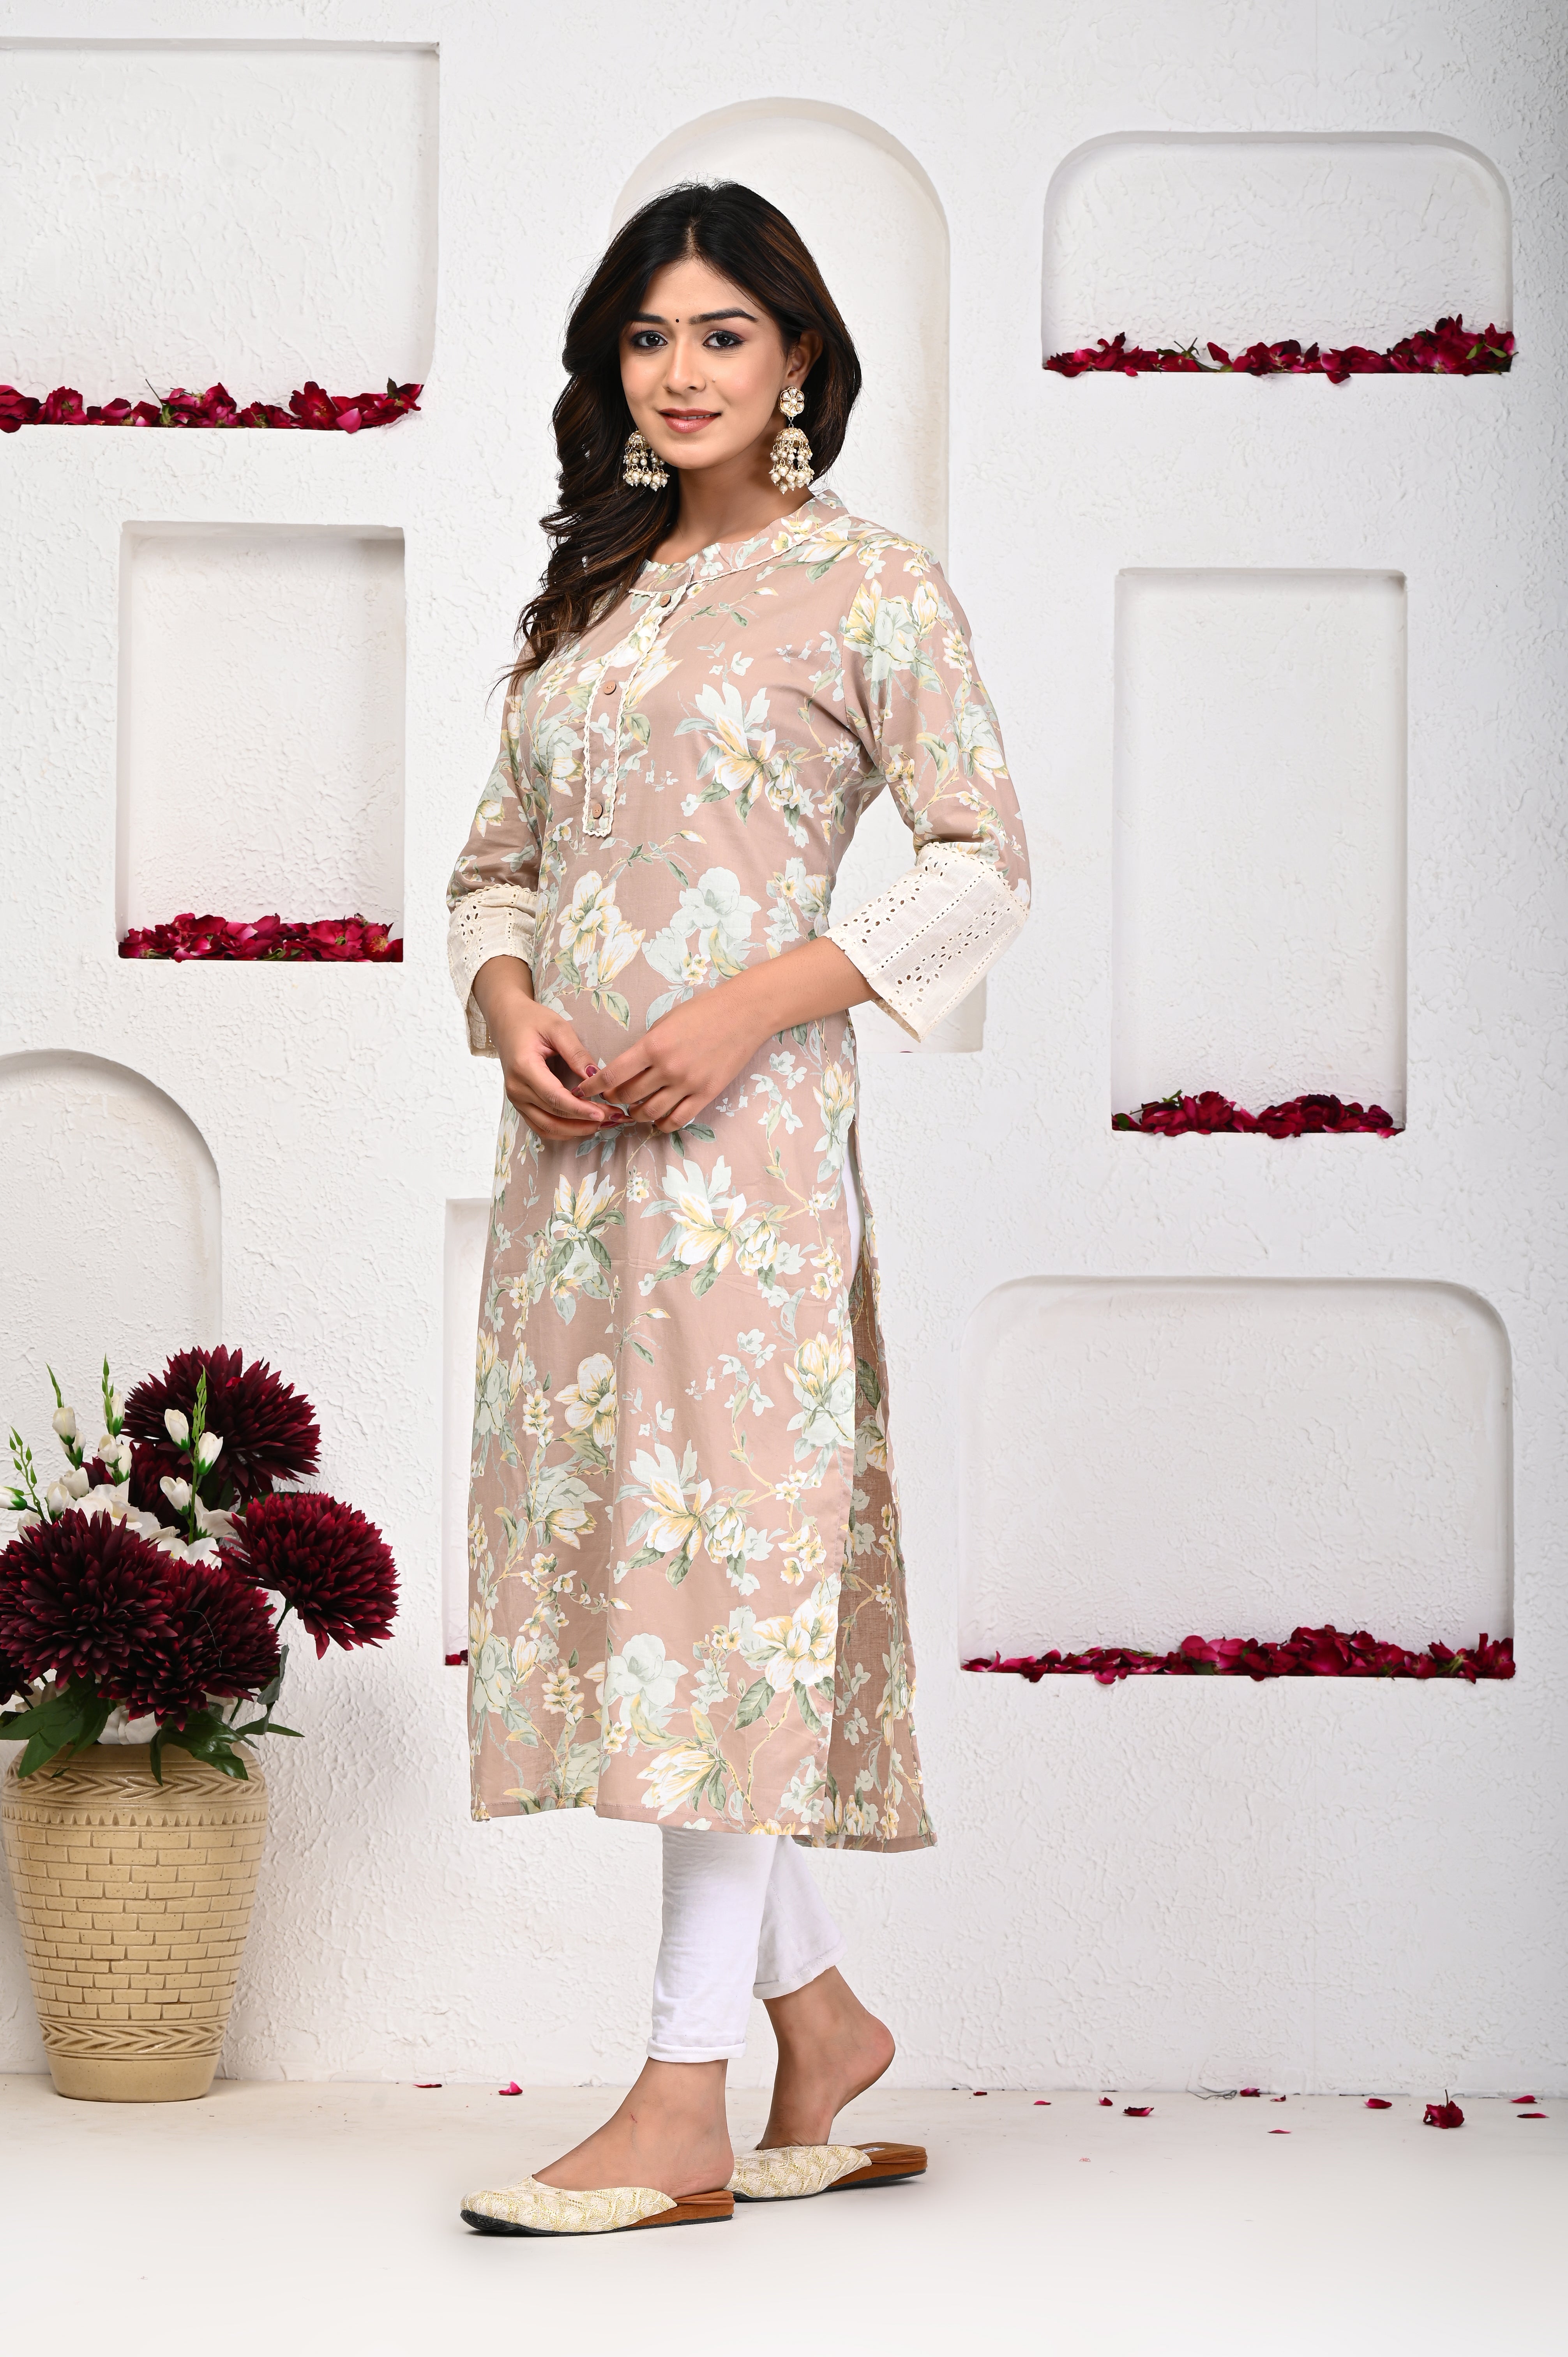 Luxurious feel of fine cotton fabric.